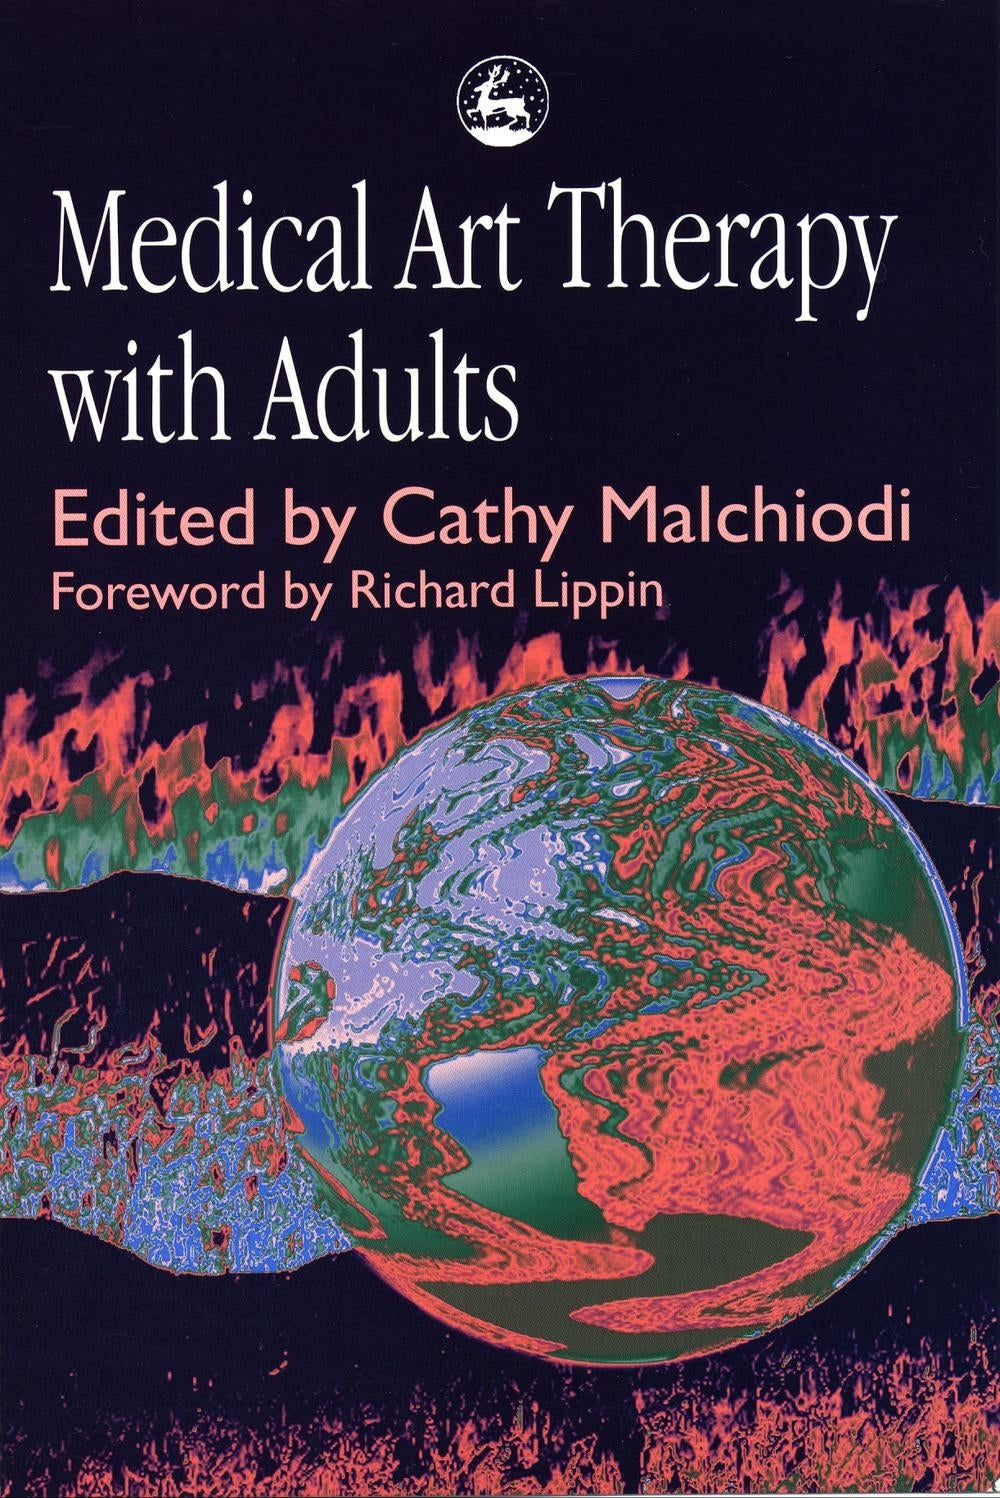 Medical Art Therapy with Adults by Ms Cathy A Malchiodi, Ms Cathy A Malchiodi